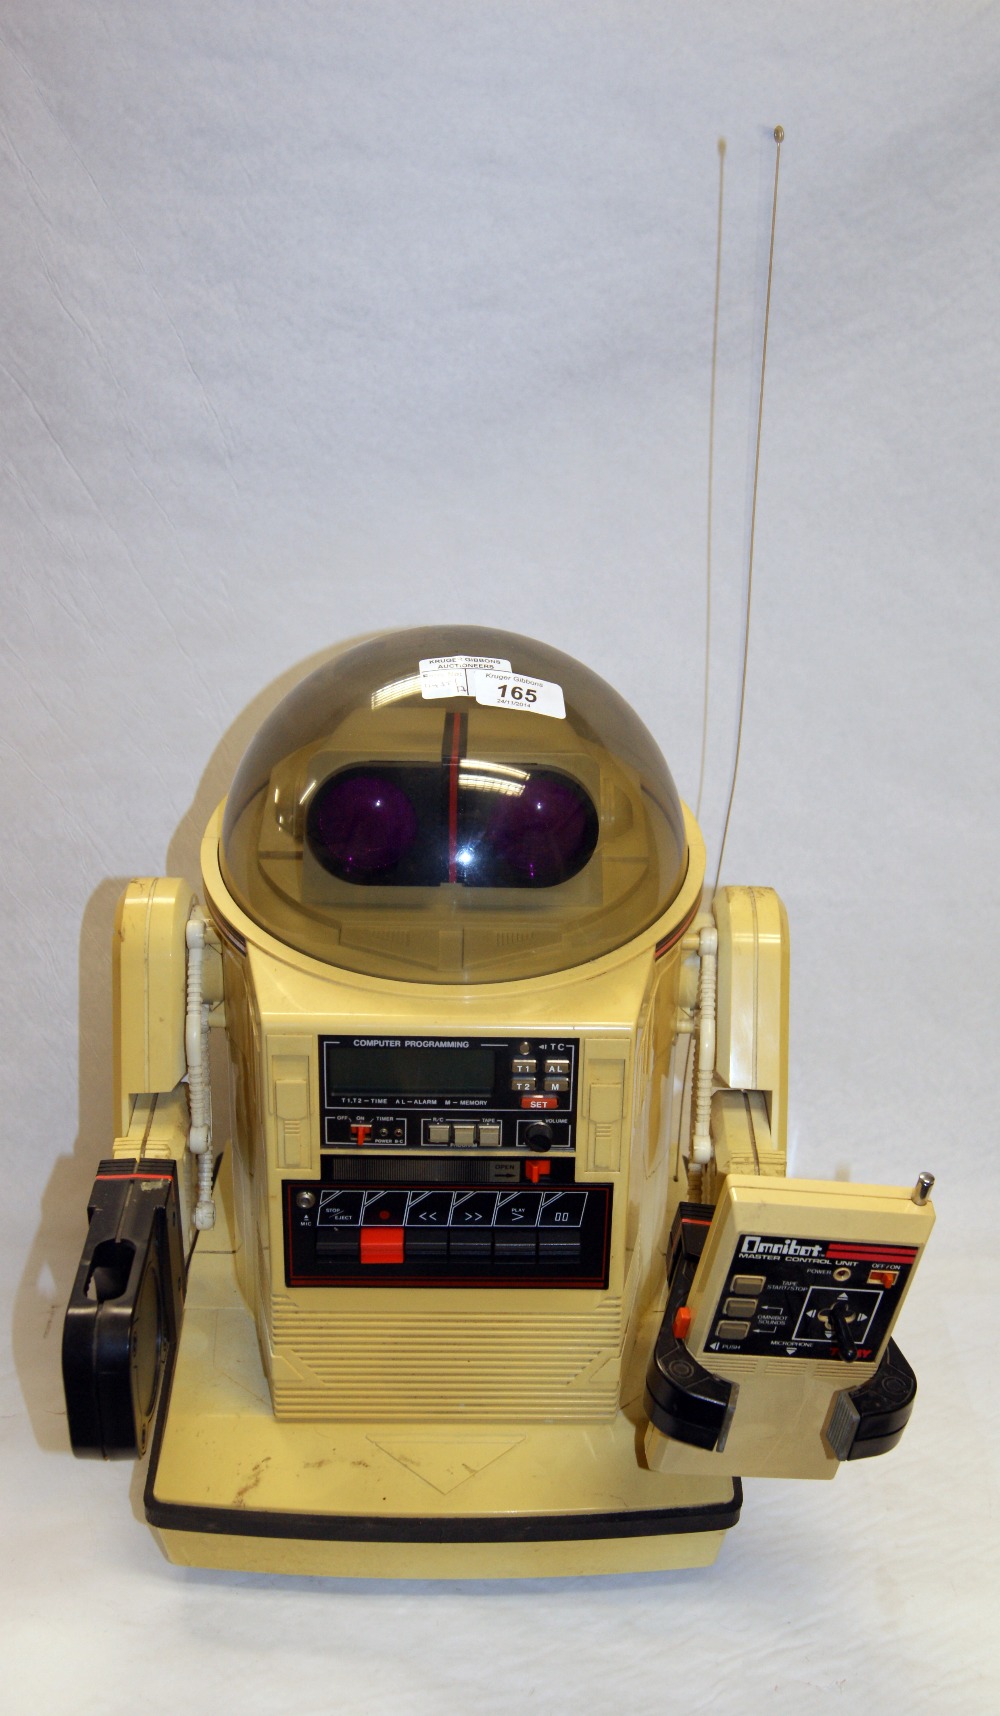 Vintage remote control robot by Tomy, model complete with tape player etc. and remote (not tested)